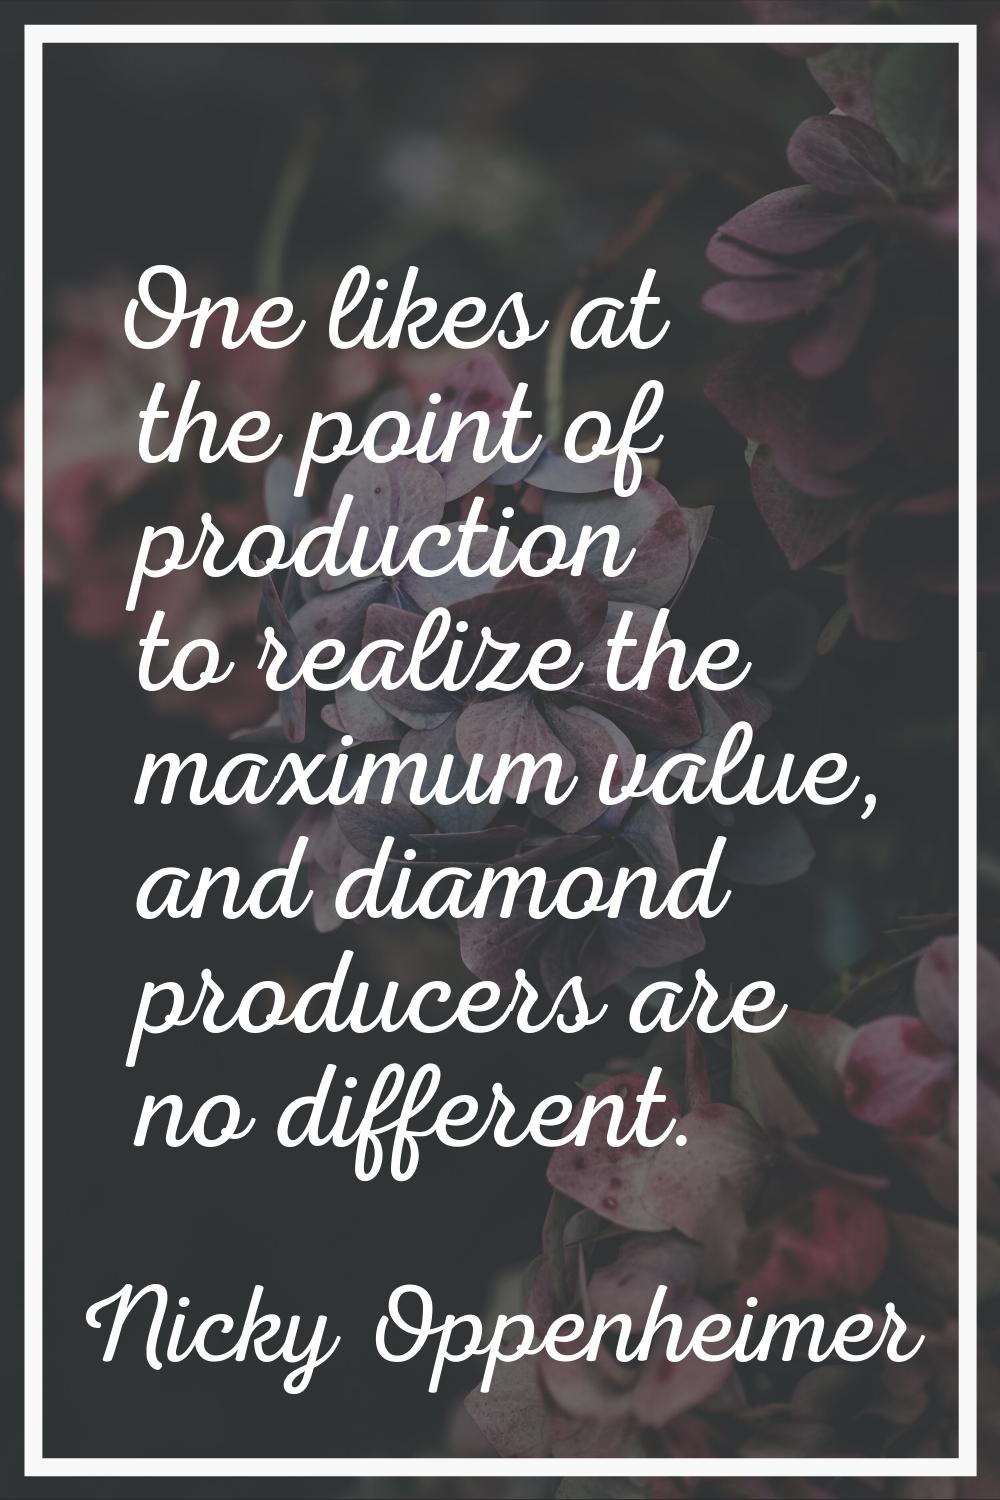 One likes at the point of production to realize the maximum value, and diamond producers are no dif